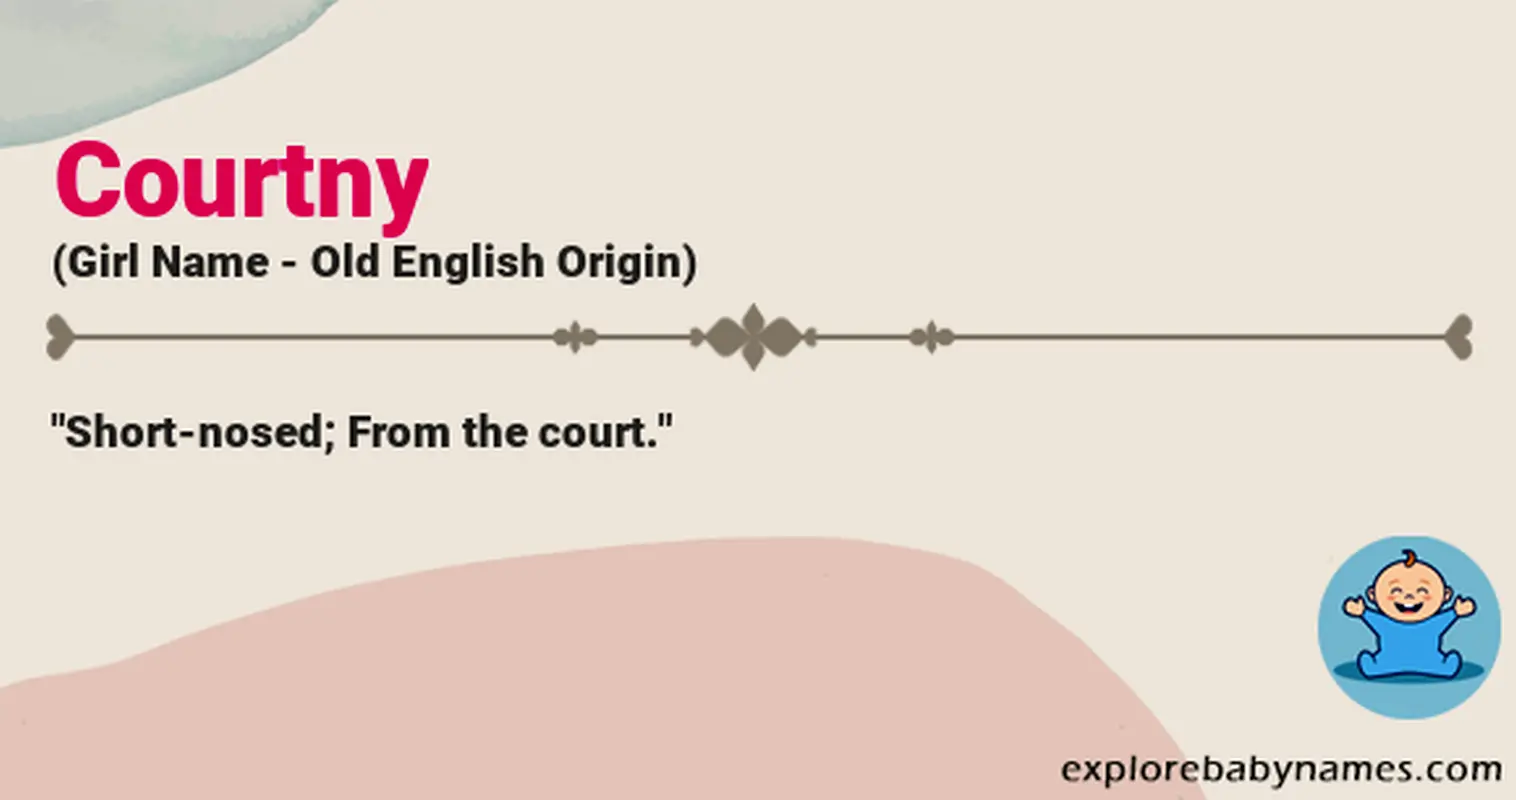 Meaning of Courtny